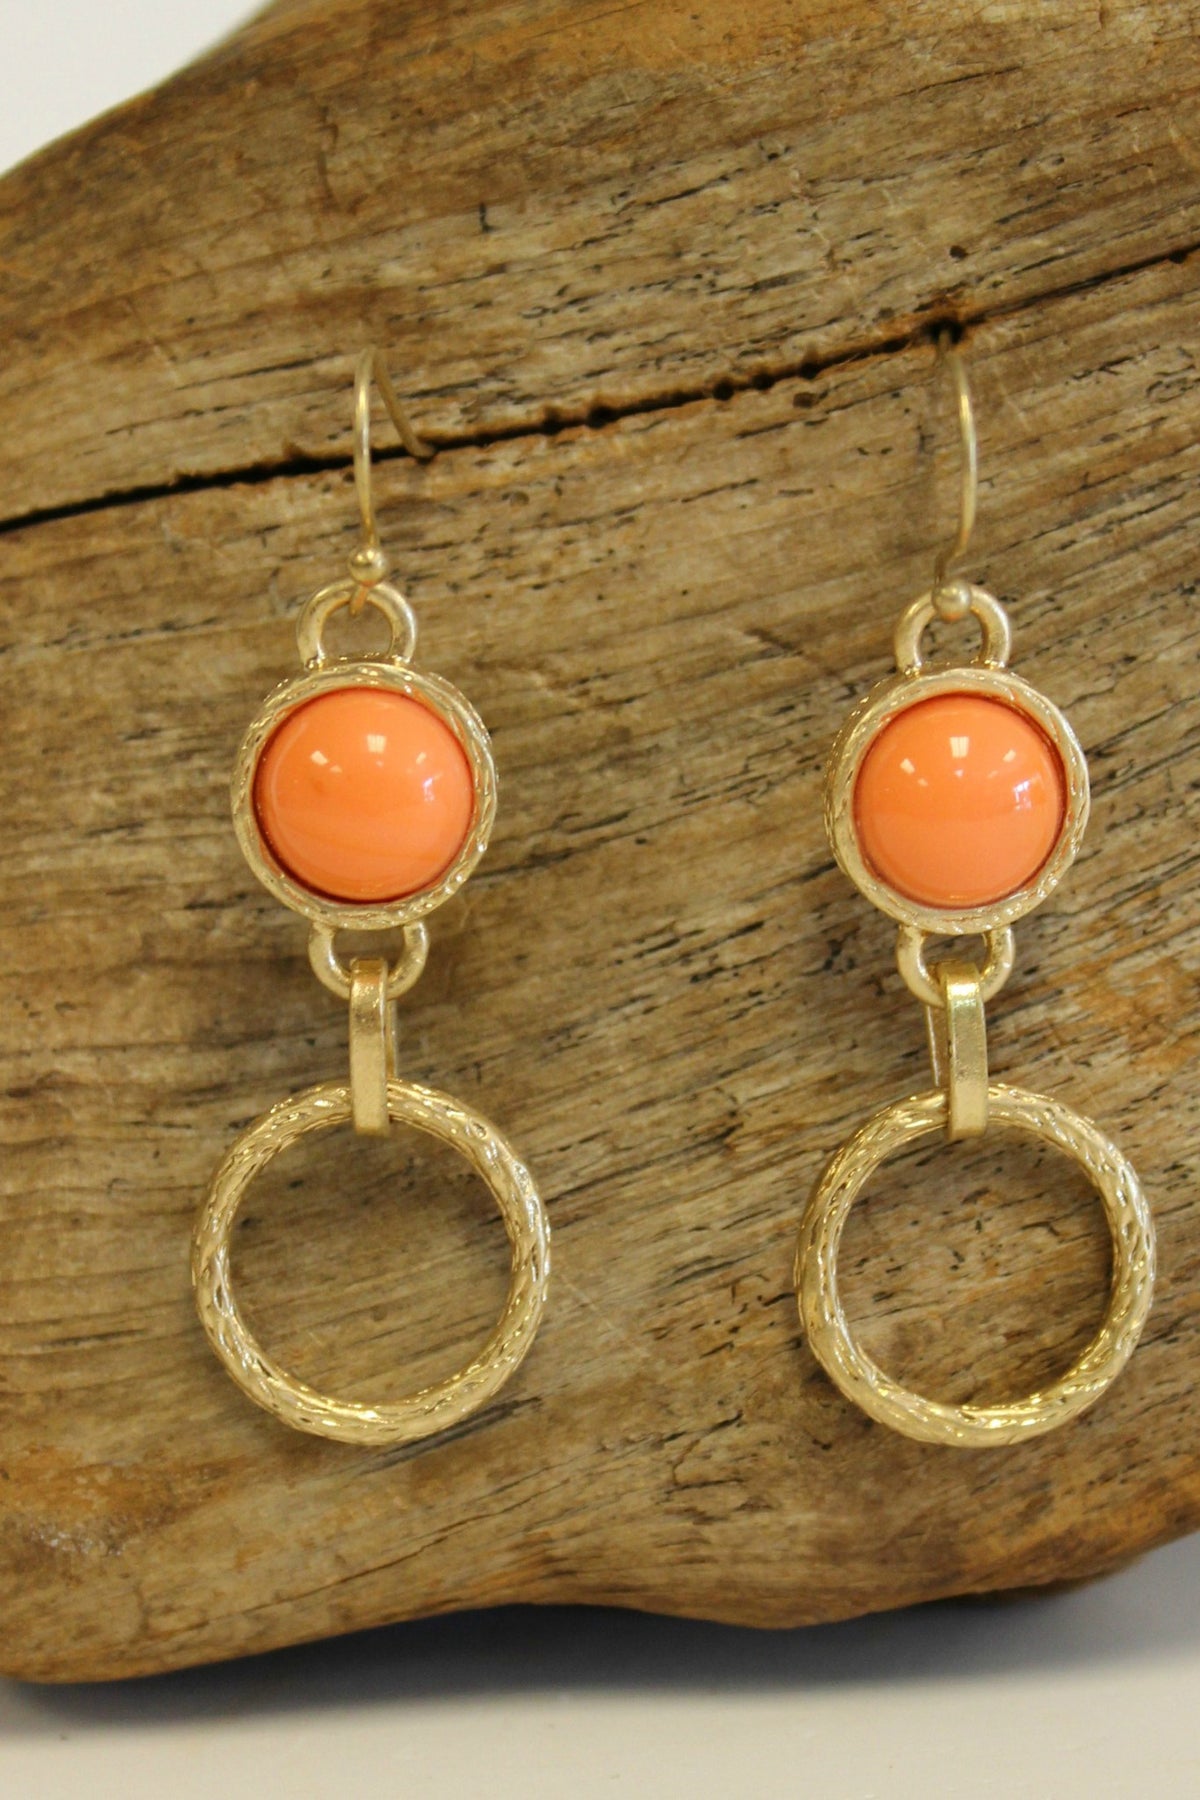 Etched Ring and Bead Earrings, Orange